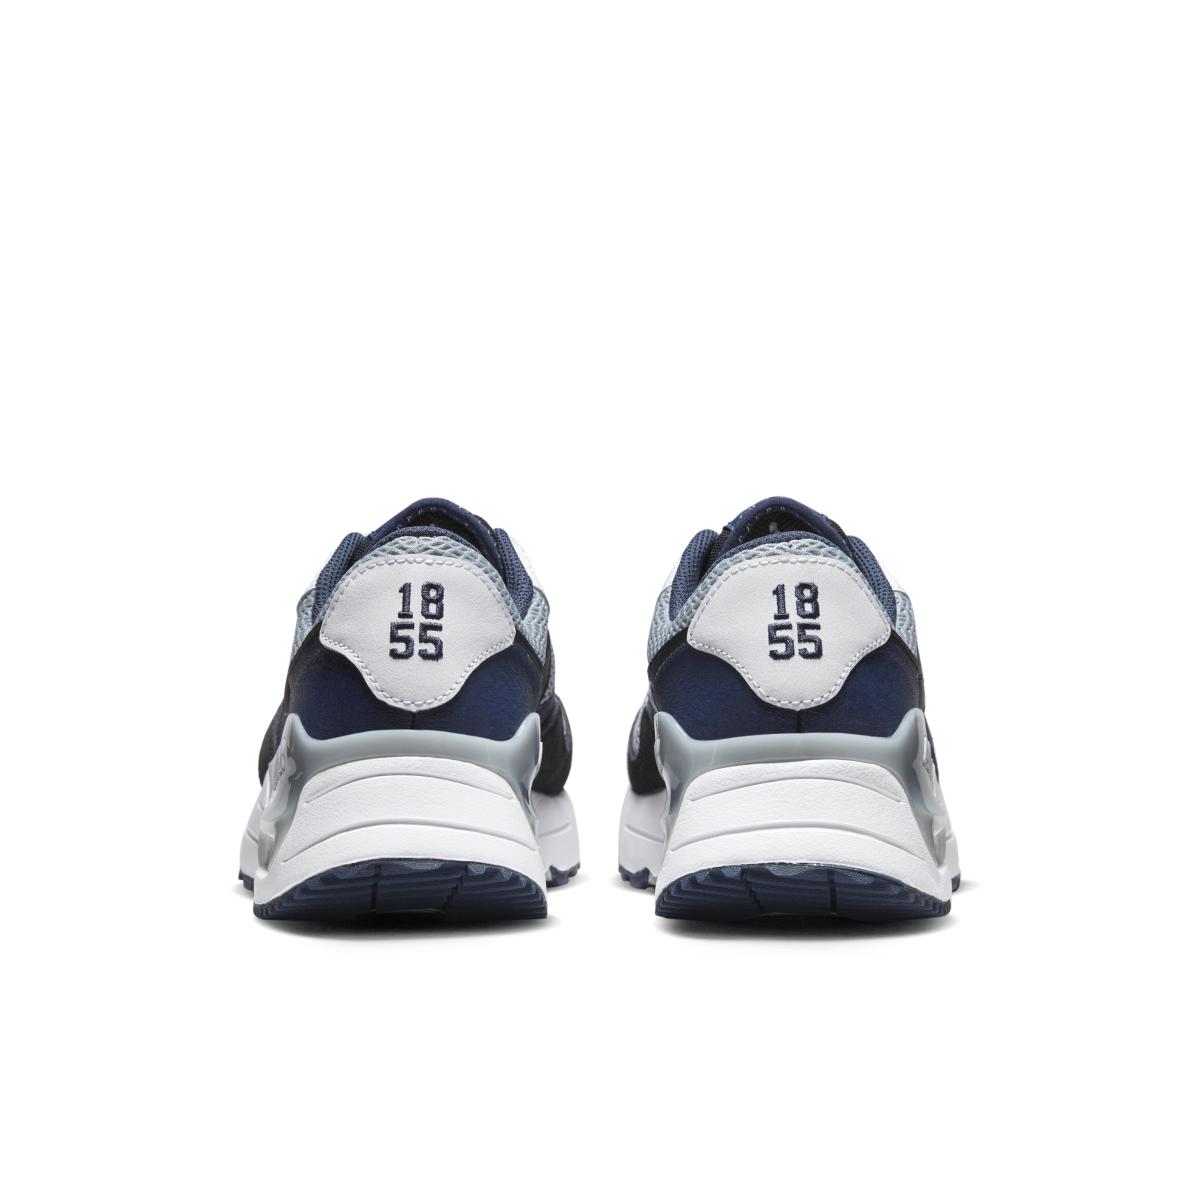 Penn State Nike sneakers 2022: How to get these new limited edition Air  Zooms, featuring Nittany Lions logo and colors 